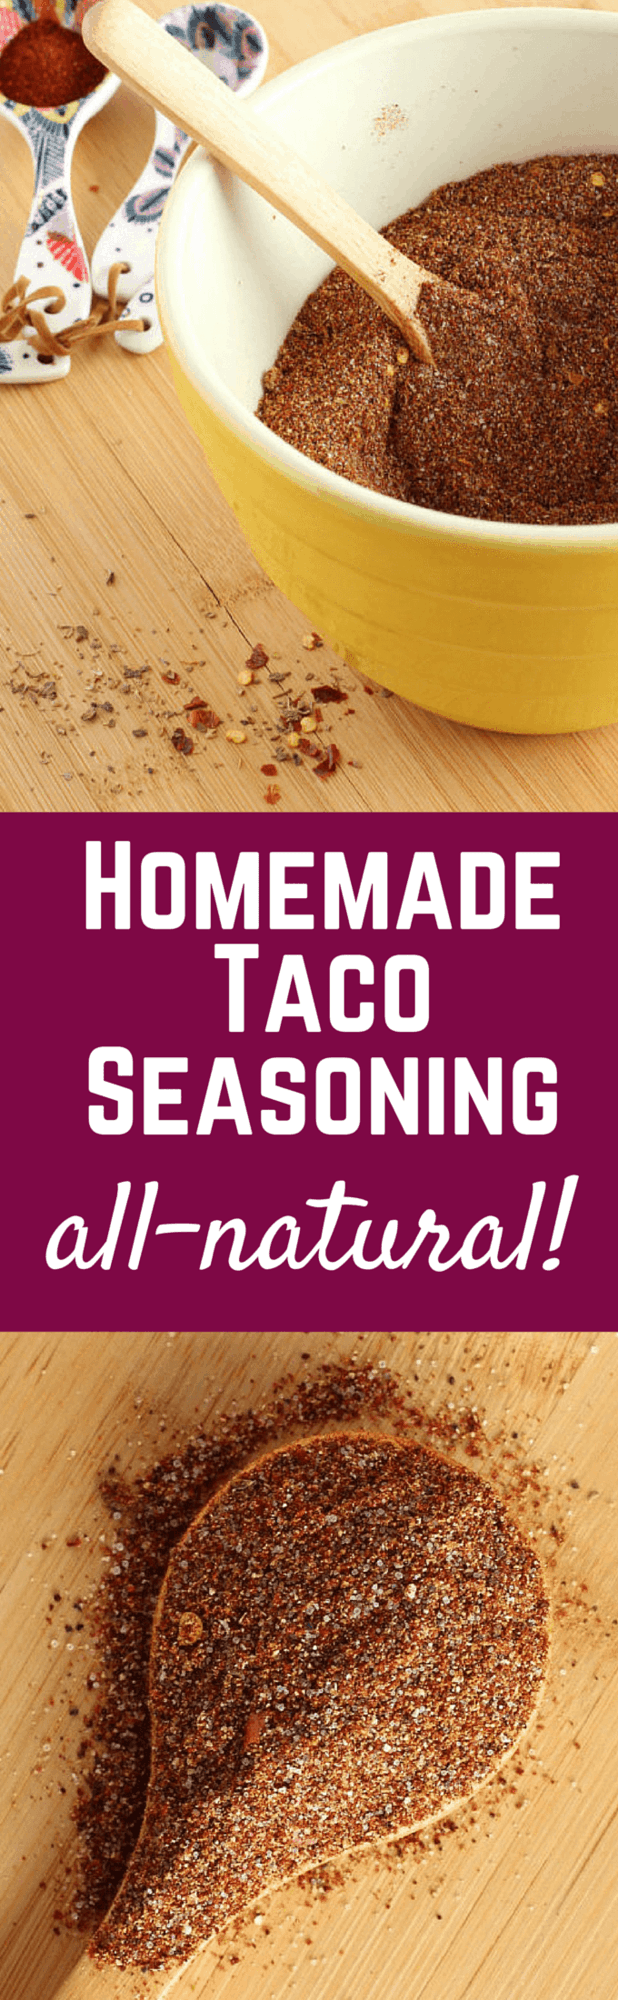 Large Batch Homemade Taco Seasoning - no MSG or additives - ALL NATURAL! Get the easy recipe on RachelCooks.com - you probably already have all the ingredients!